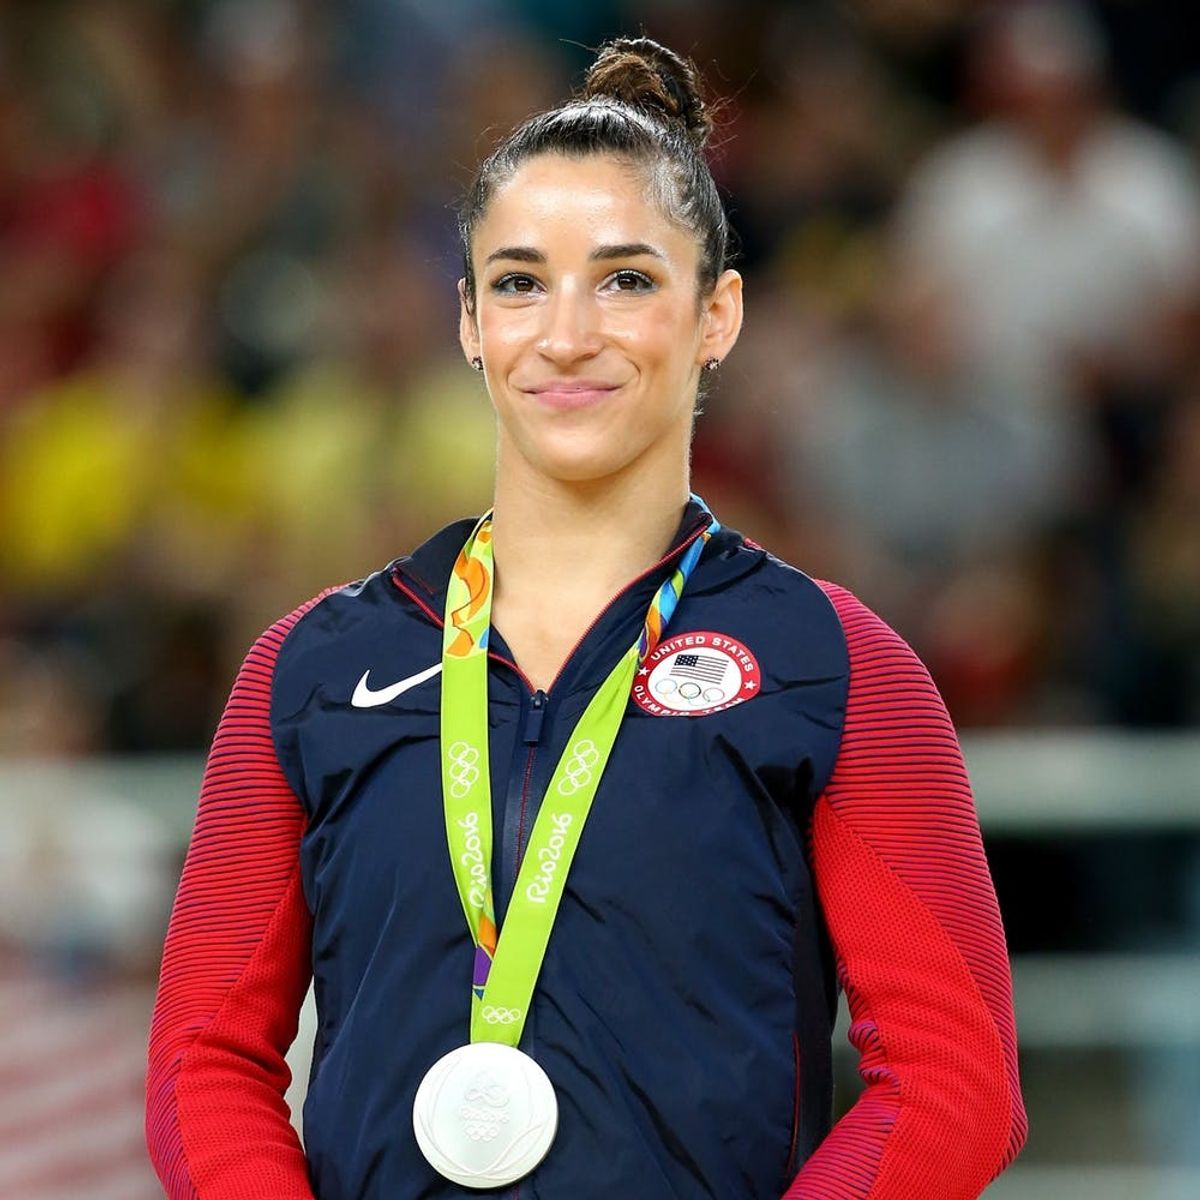 Olympian Aly Raisman Says She Was Abused by Former USA Gymnastics Doctor Larry Nassar